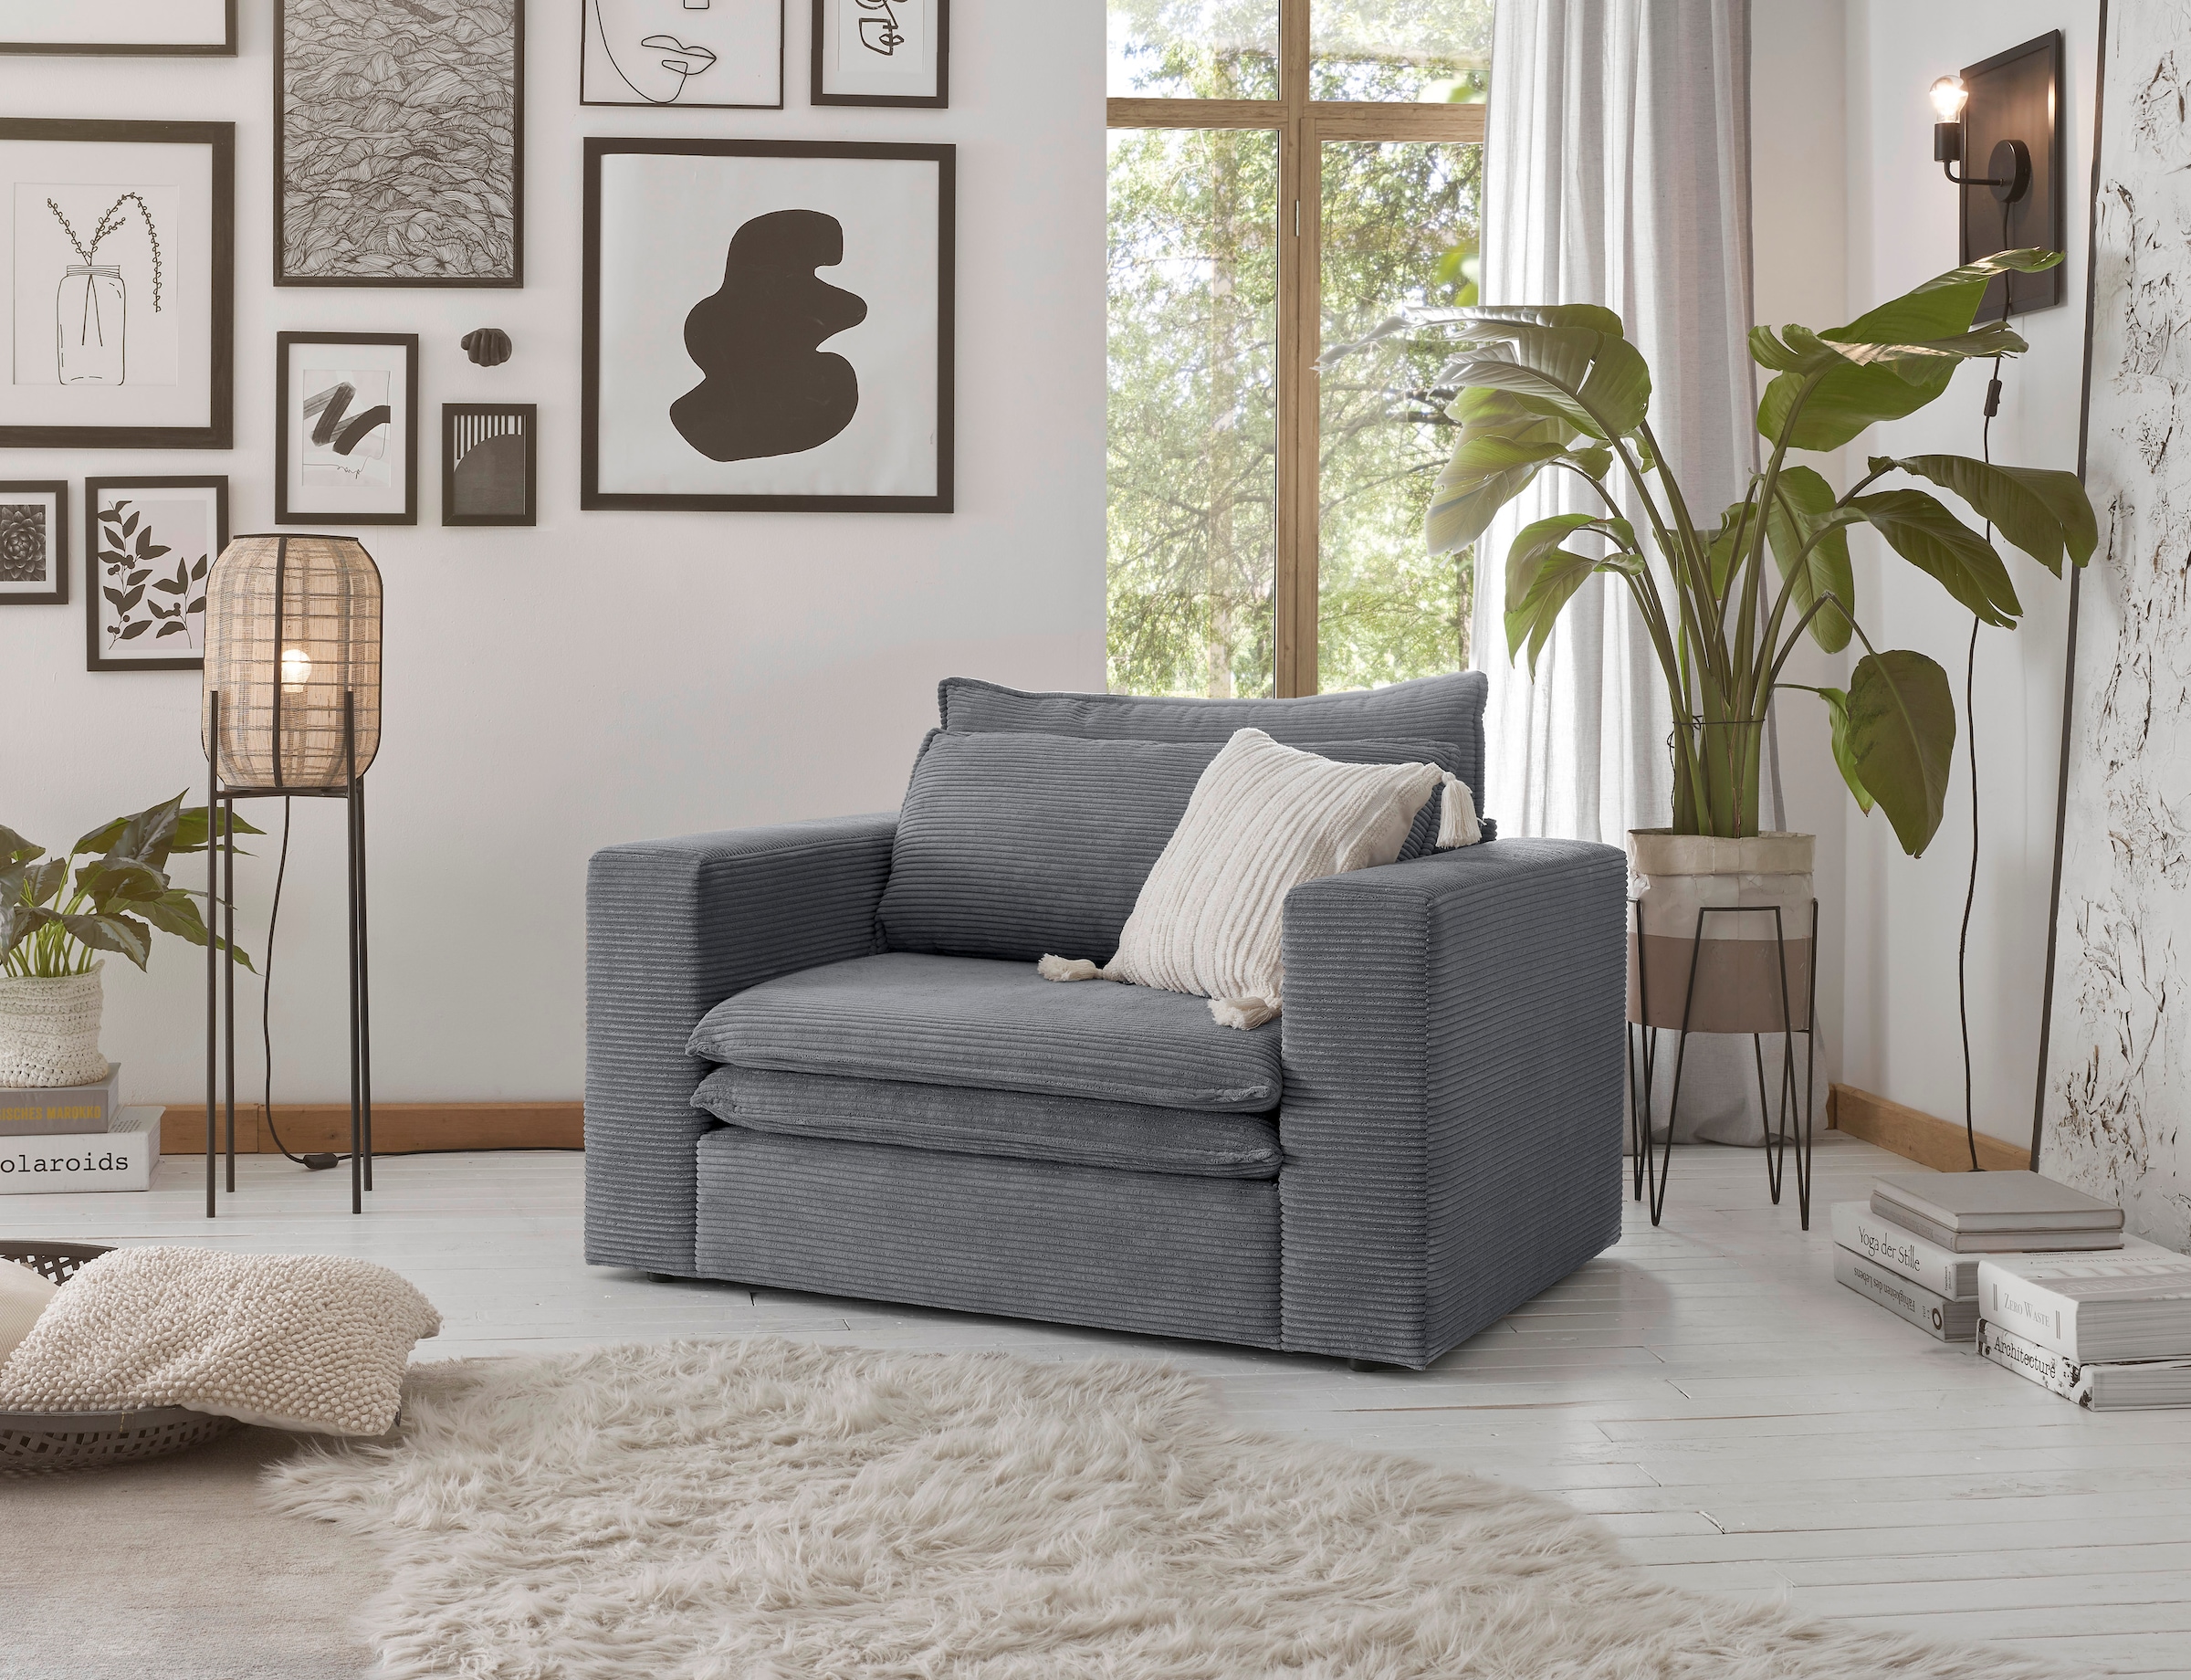 of Loveseat »PIAGGE« BAUR kaufen | Places Style